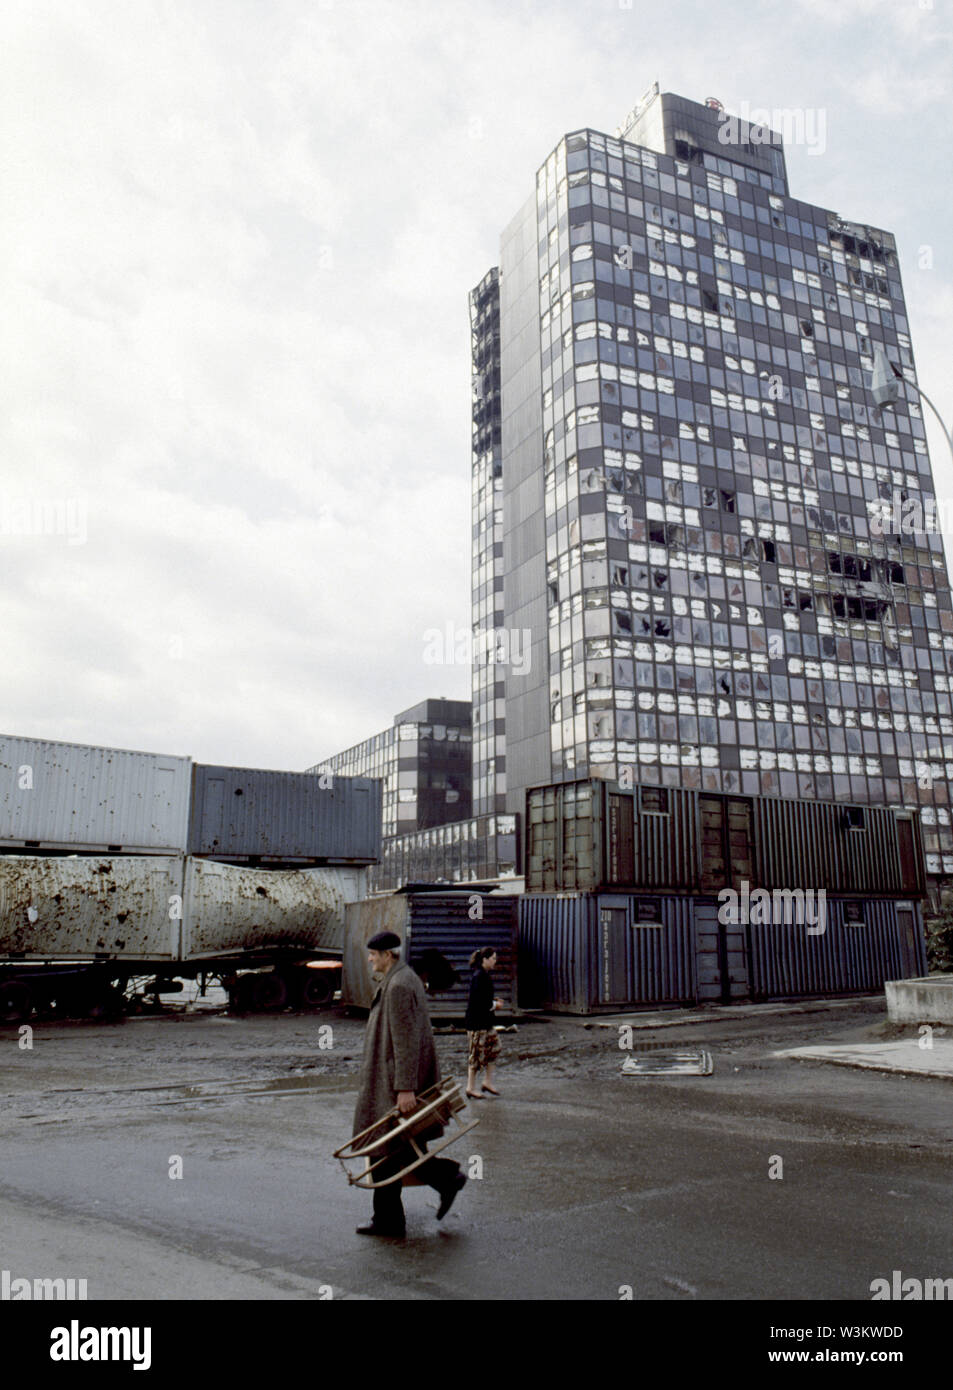 11th April 1993 During the Siege of Sarajevo: in the shadow of the Energoinvest buiding, local people walk past shrapnel-ridden containers that act as a sniper screen at the junction of Bratstva i jedinstva and Krusevacka (renamed Hamdije Cemerlica and Put zivota after the war). Stock Photo